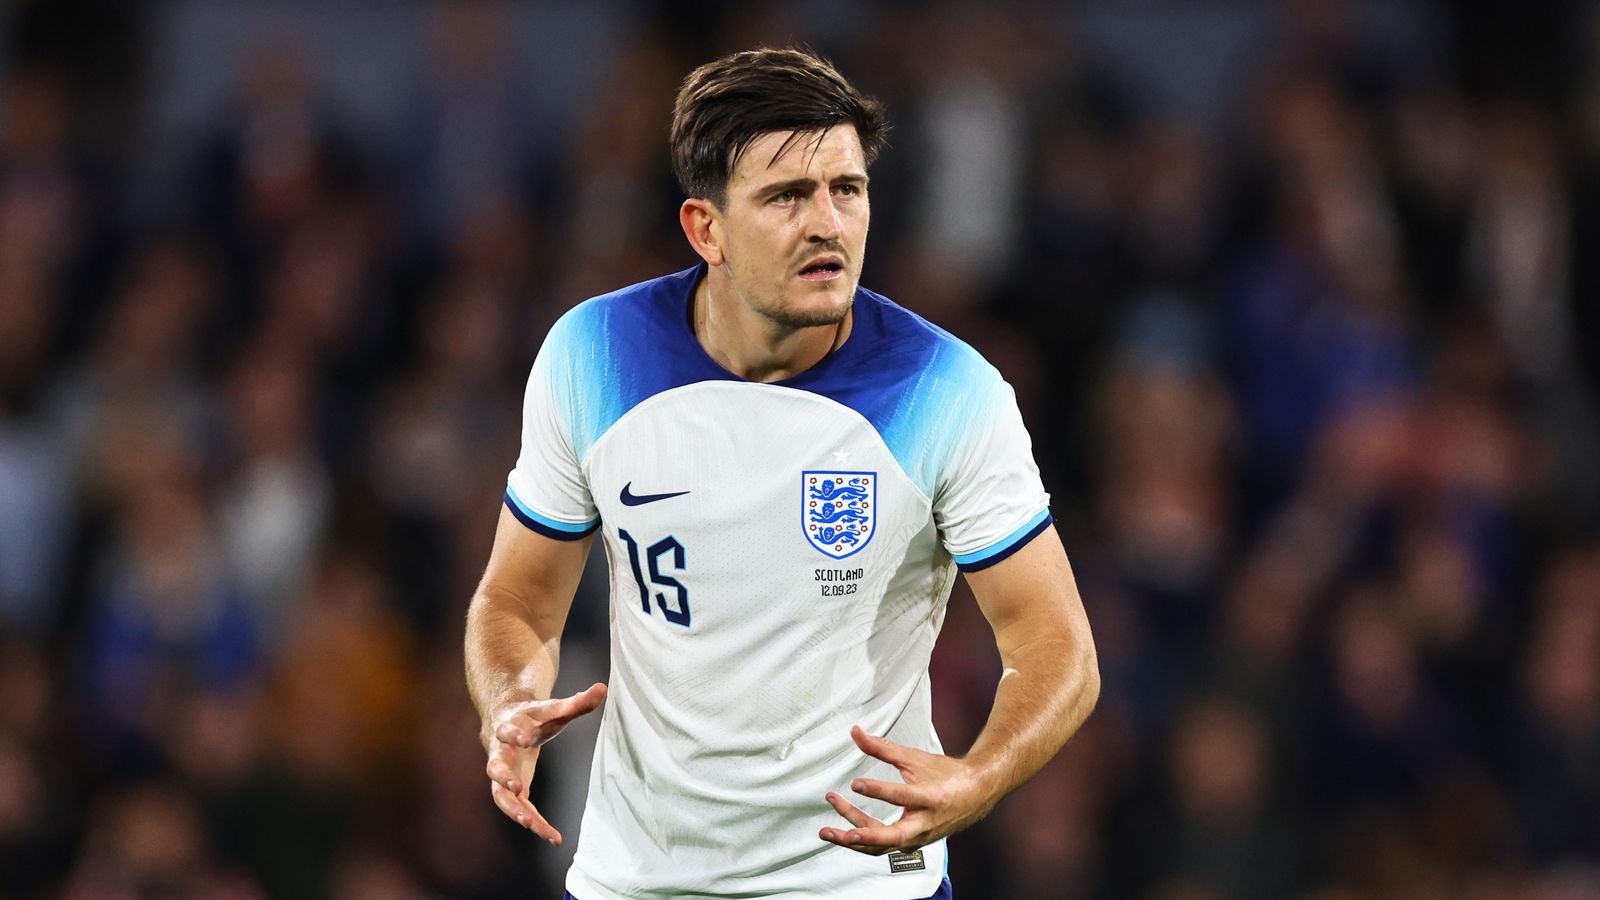 Gareth Southgate says treatment of Harry Maguire 'a joke' in passionate defence of England defender | Football News